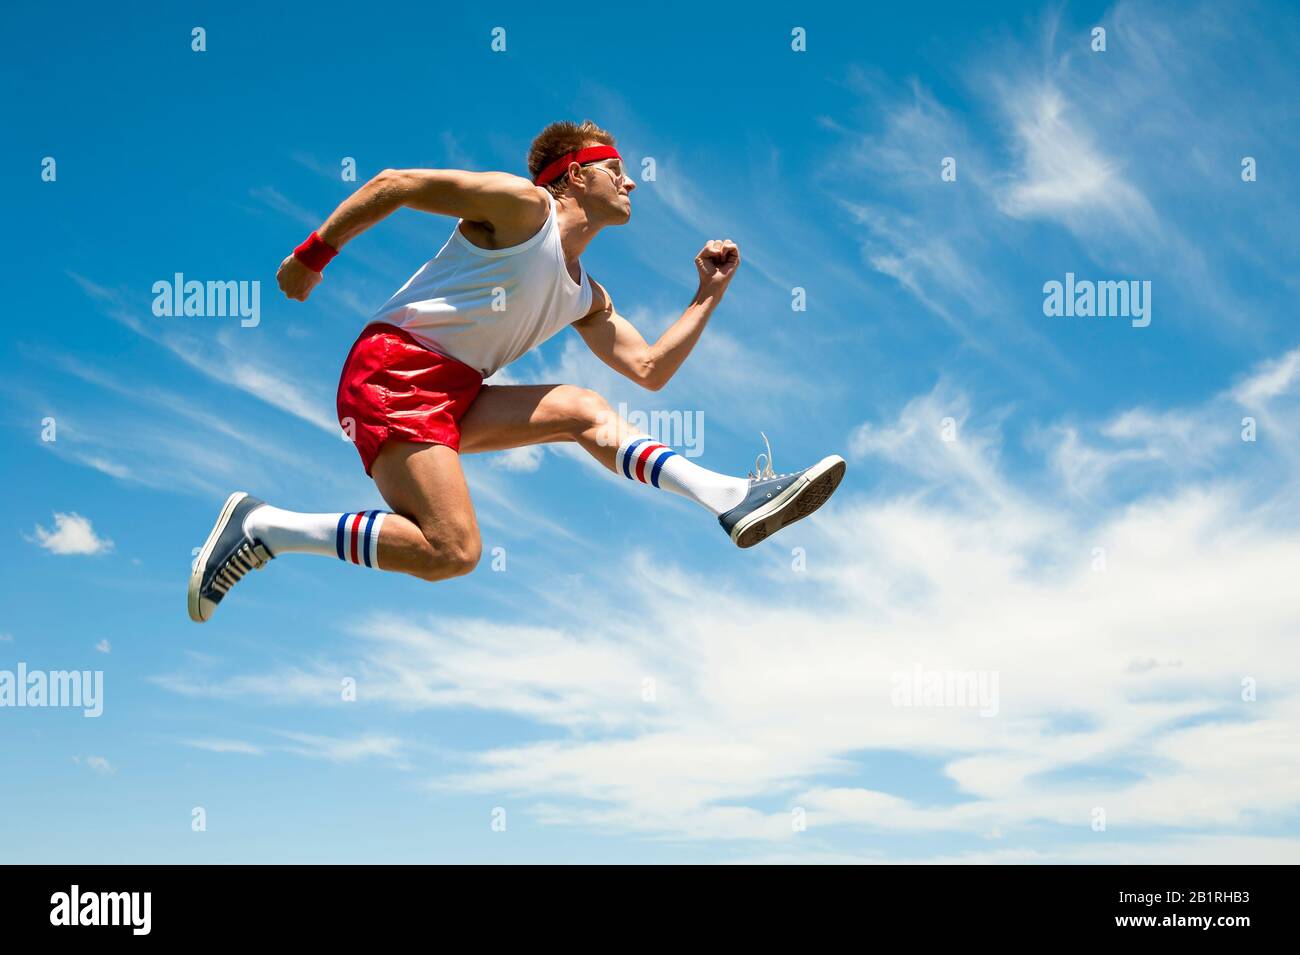 Skinny nerd athlete leaping in the long jump wearing vintage athletic wear  against a bright blue sky Stock Photo - Alamy